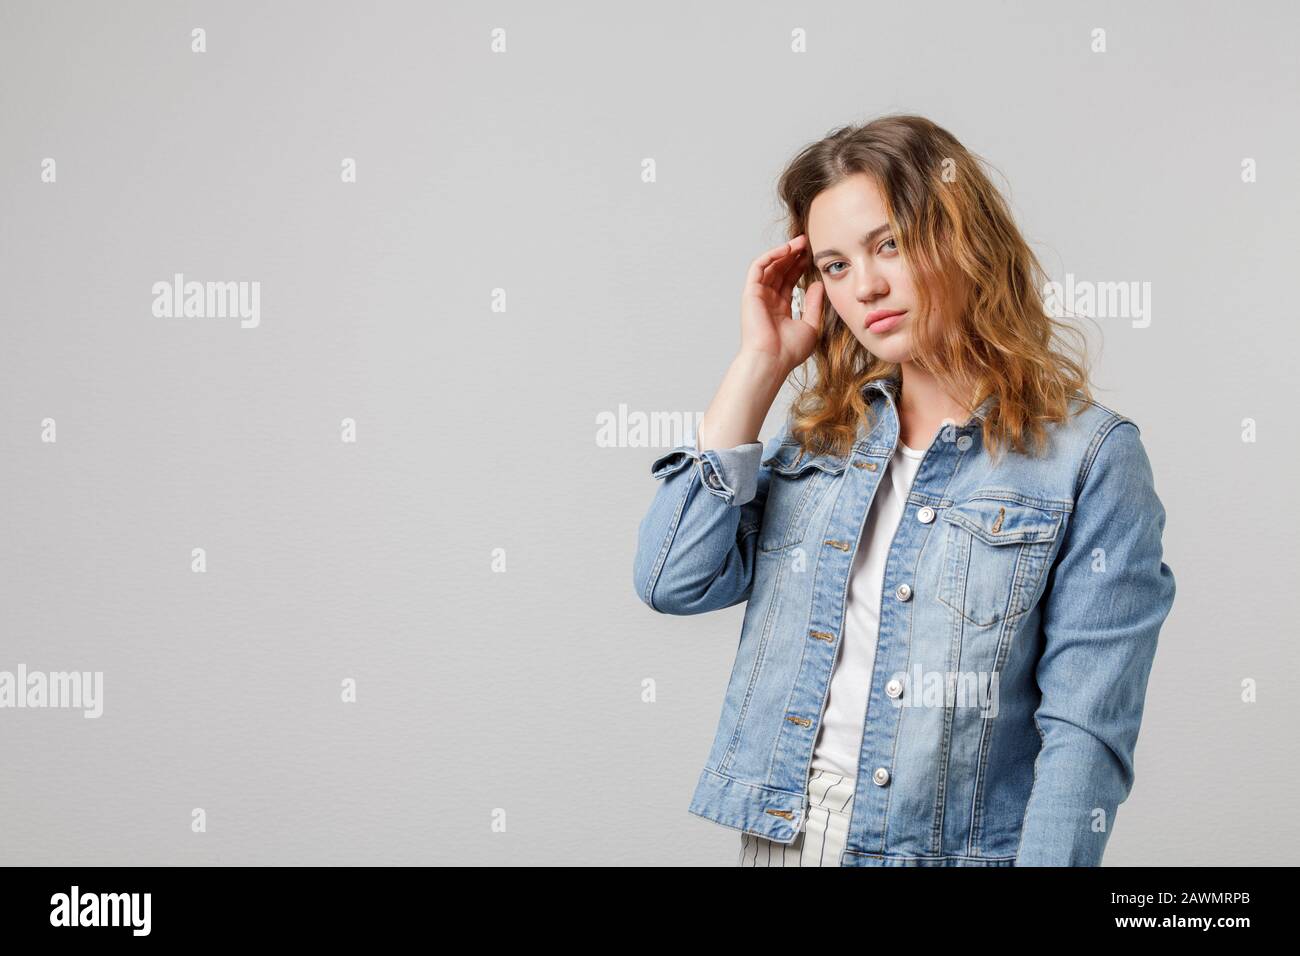 Young girl with long flowing hair in a denim jacket looks thoughtfully at the camera and touches her hair. Half-length portrait on a white background. Stock Photo